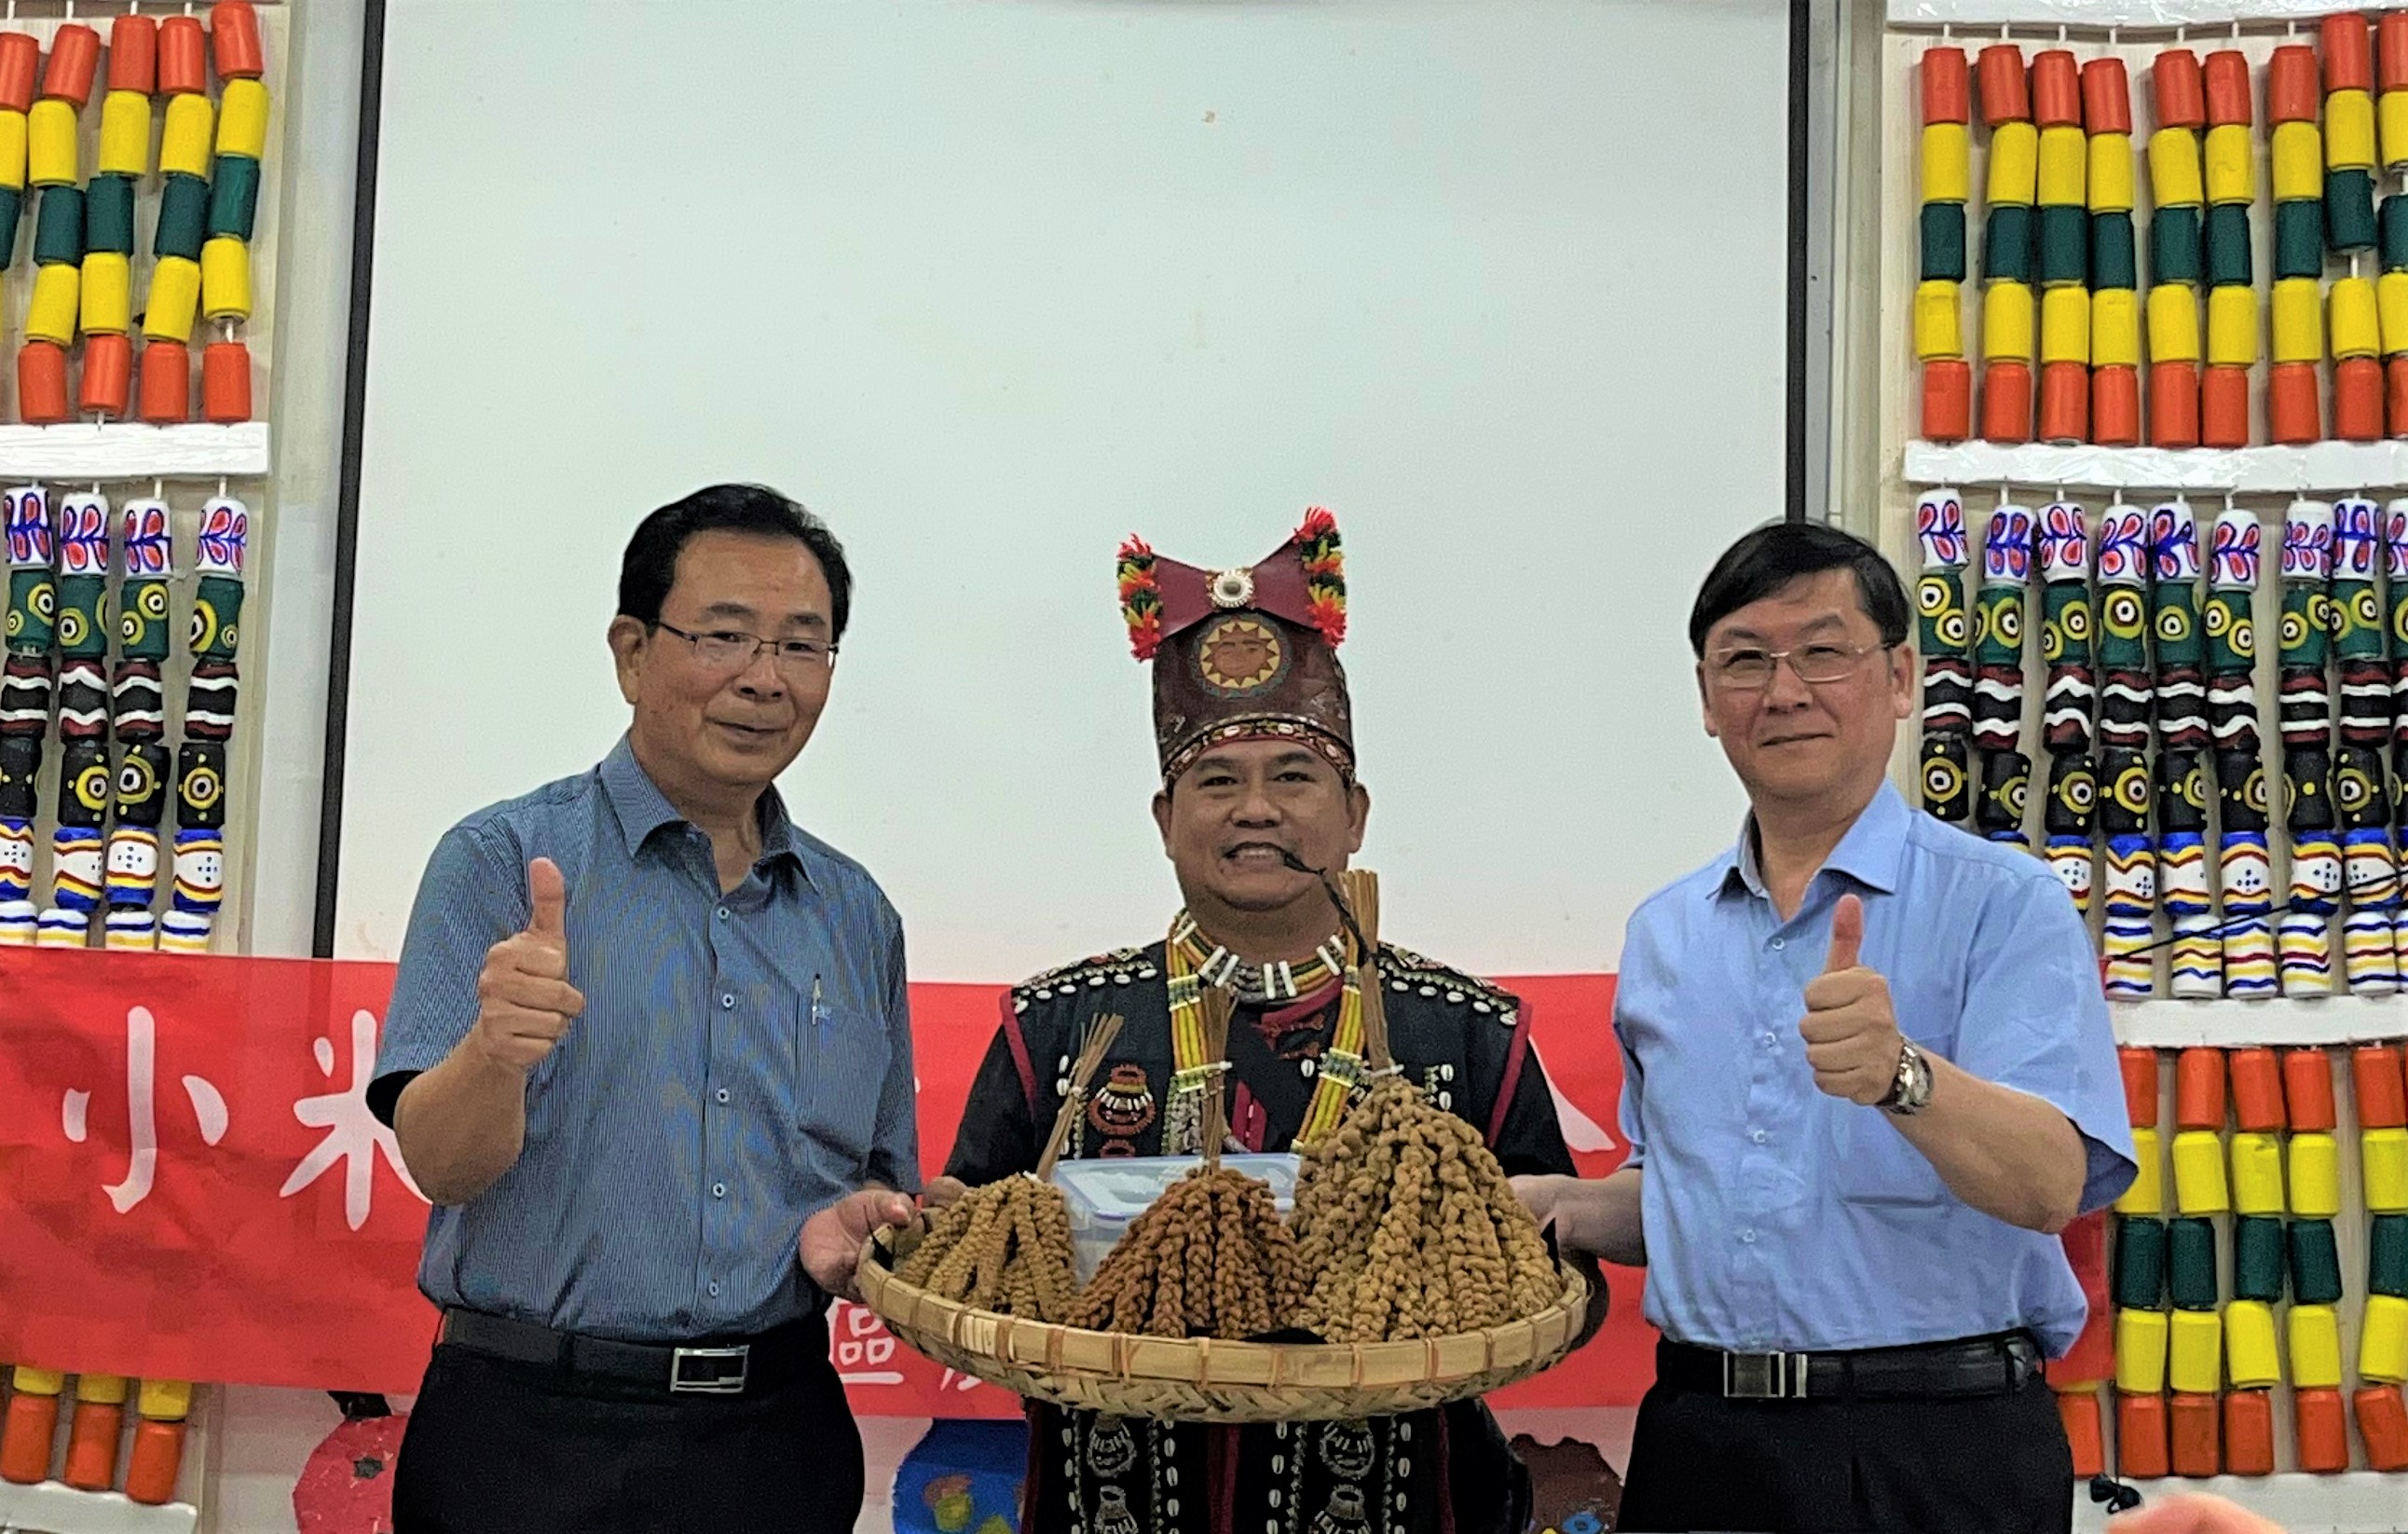 TTDARES Director Chen Hsin-yen (left) and Eastern Region Branch of the Agriculture and Food Agency Deputy Director Chen Chi-tsun (right) gave germplasm resources of three millet varieties to Taromak community leader Danaro Lavalius.